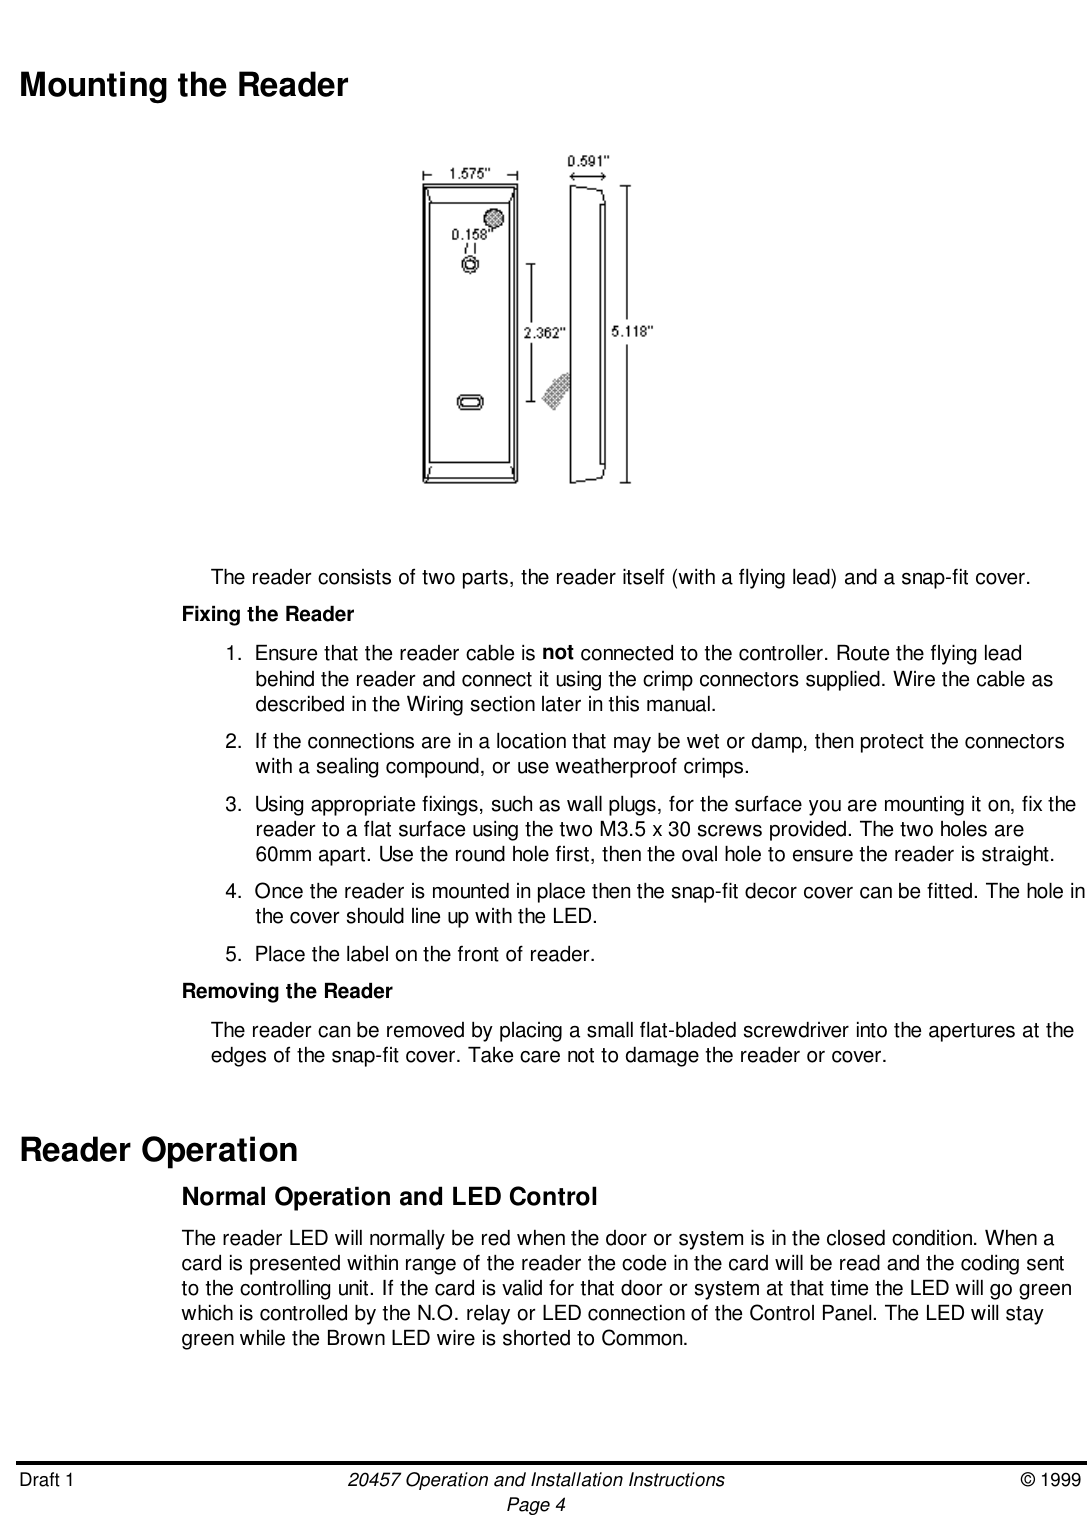 Draft 1 20457 Operation and Installation Instructions © 1999Page 4Mounting the Reader                               The reader consists of two parts, the reader itself (with a flying lead) and a snap-fit cover.Fixing the Reader1.  Ensure that the reader cable is not connected to the controller. Route the flying leadbehind the reader and connect it using the crimp connectors supplied. Wire the cable asdescribed in the Wiring section later in this manual.2.  If the connections are in a location that may be wet or damp, then protect the connectorswith a sealing compound, or use weatherproof crimps.3.  Using appropriate fixings, such as wall plugs, for the surface you are mounting it on, fix thereader to a flat surface using the two M3.5 x 30 screws provided. The two holes are60mm apart. Use the round hole first, then the oval hole to ensure the reader is straight.4.  Once the reader is mounted in place then the snap-fit decor cover can be fitted. The hole inthe cover should line up with the LED.5.  Place the label on the front of reader.Removing the ReaderThe reader can be removed by placing a small flat-bladed screwdriver into the apertures at theedges of the snap-fit cover. Take care not to damage the reader or cover.Reader OperationNormal Operation and LED ControlThe reader LED will normally be red when the door or system is in the closed condition. When acard is presented within range of the reader the code in the card will be read and the coding sentto the controlling unit. If the card is valid for that door or system at that time the LED will go greenwhich is controlled by the N.O. relay or LED connection of the Control Panel. The LED will staygreen while the Brown LED wire is shorted to Common.